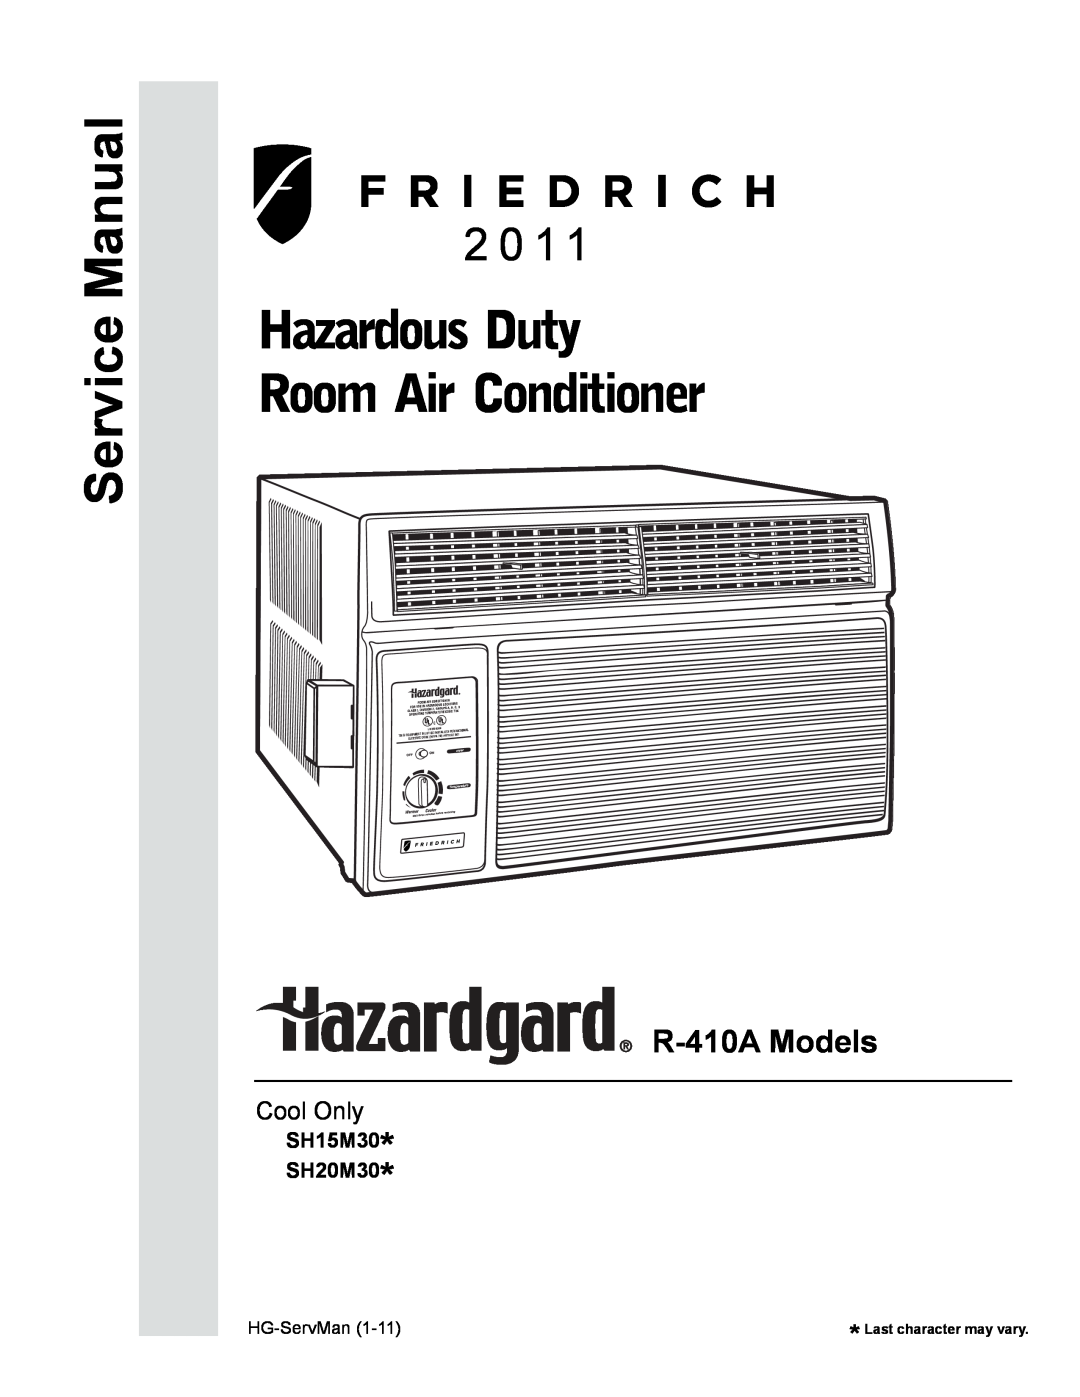 Friedrich service manual Standard Chassis R-410AModels, Room Air Conditioners, Service Manual, Cool Only 